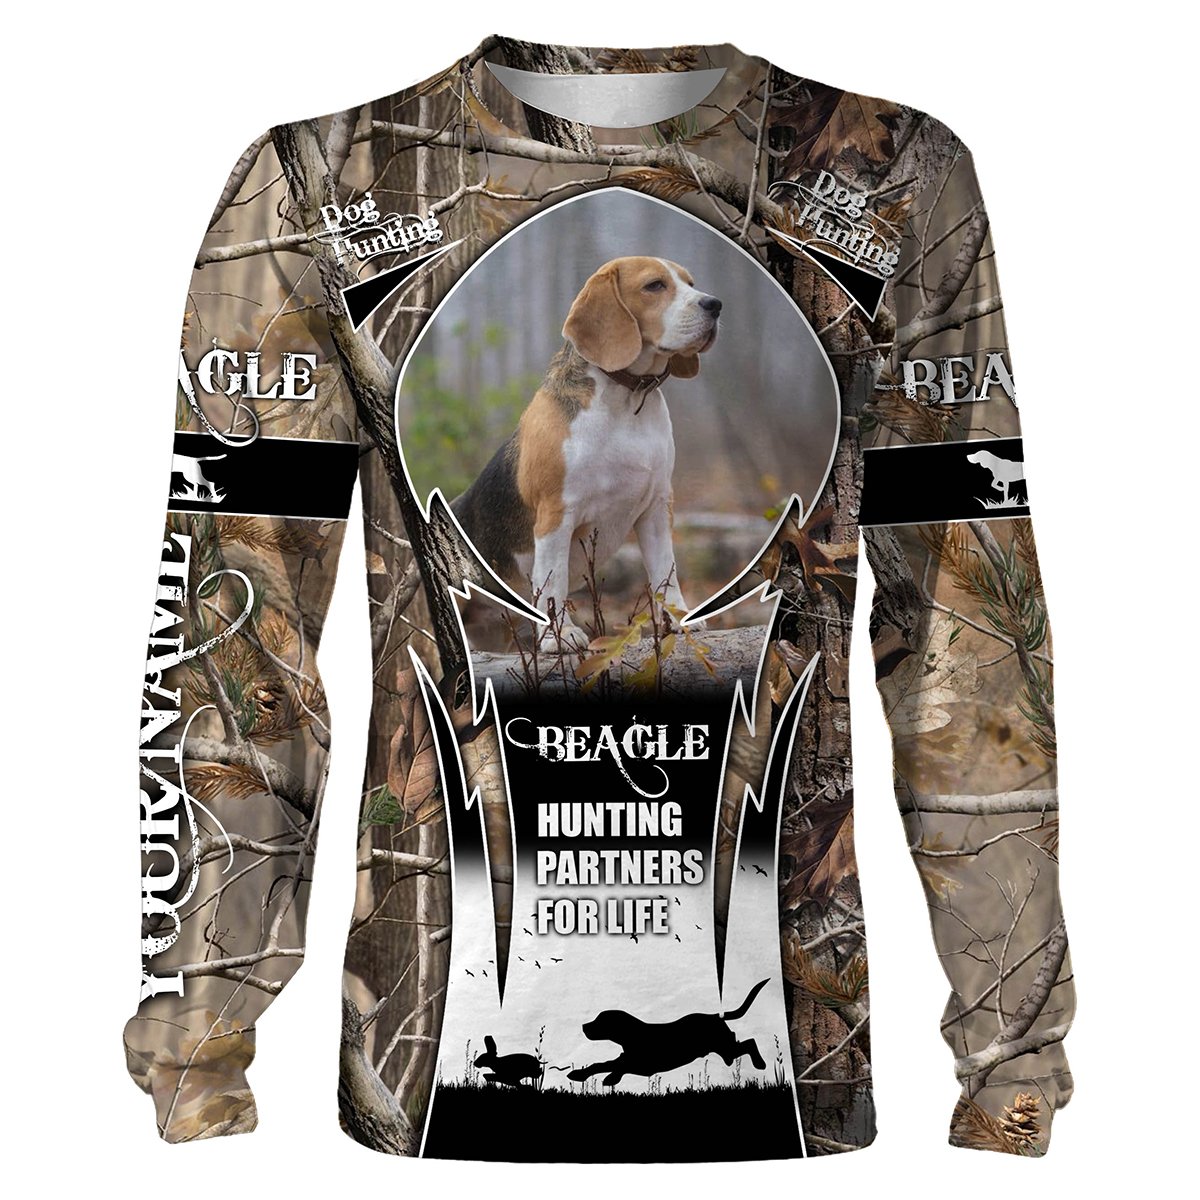 “Beagle – Hunting partners for life” rabbit hunting dog custom Name and Photo 3D All over print Shirts, Hoodie, Zip up hoodie – FSD1033